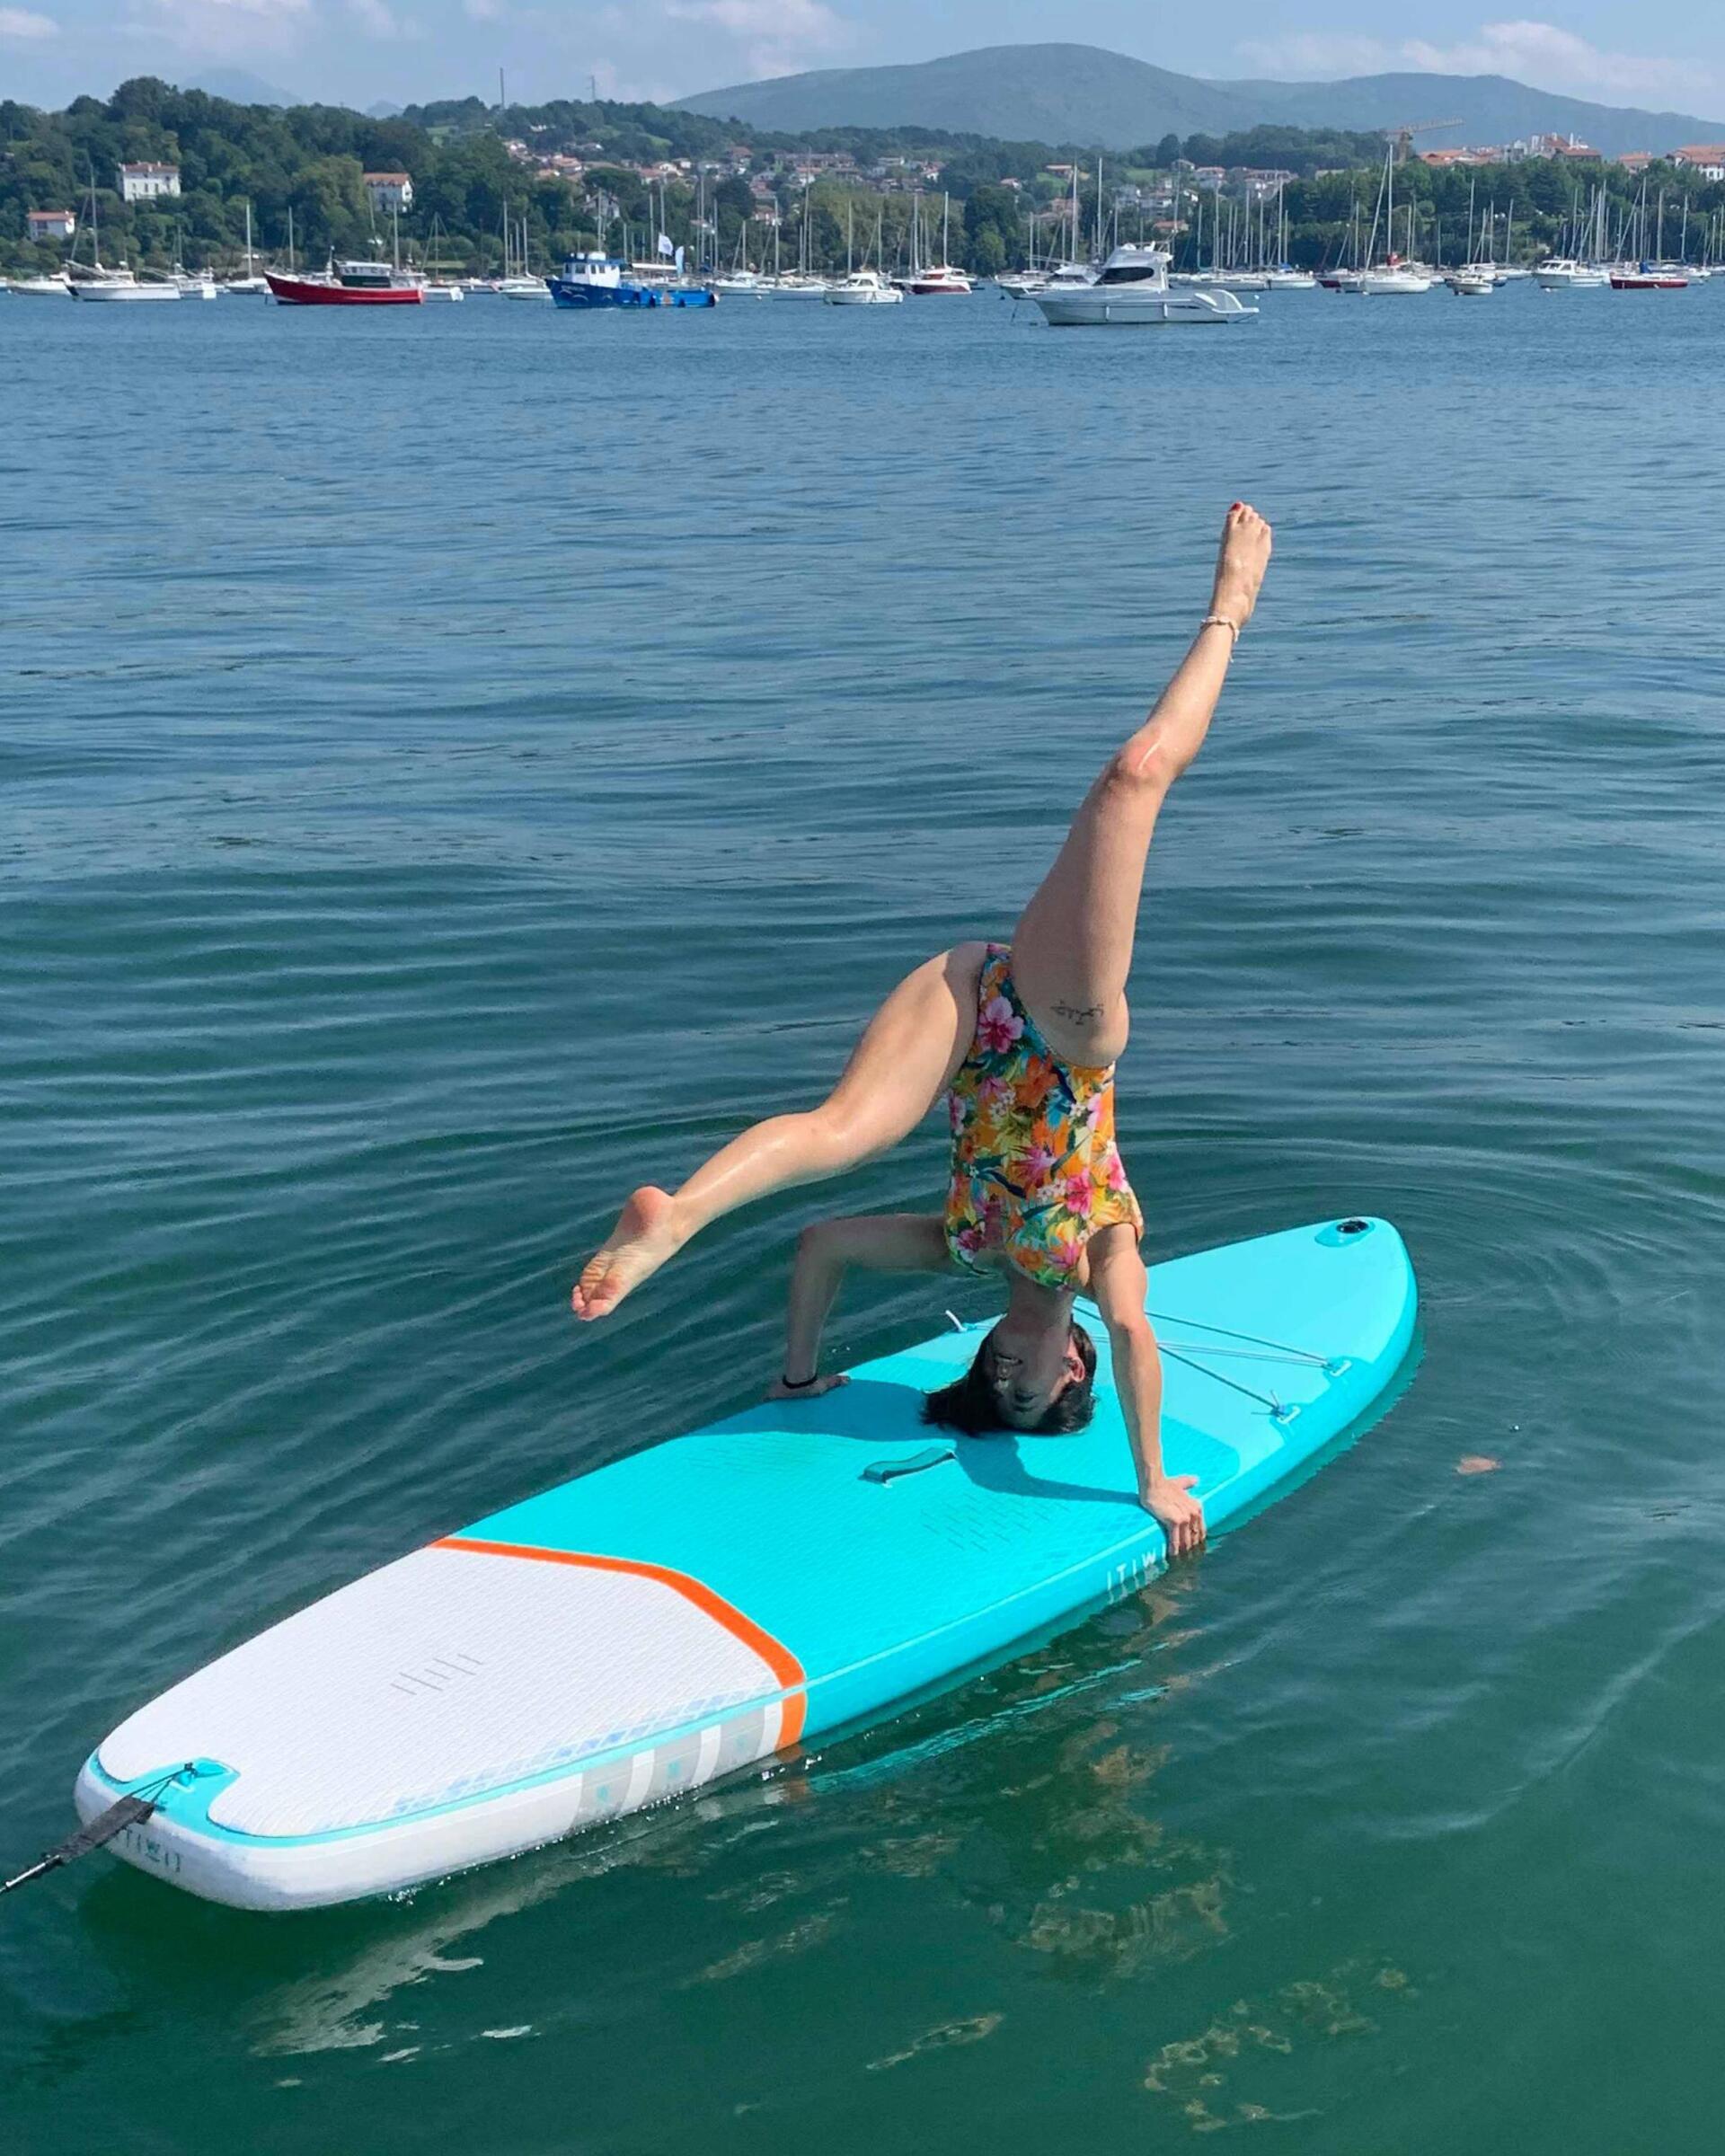 Doing pilates on a stand-up paddle (sup) board